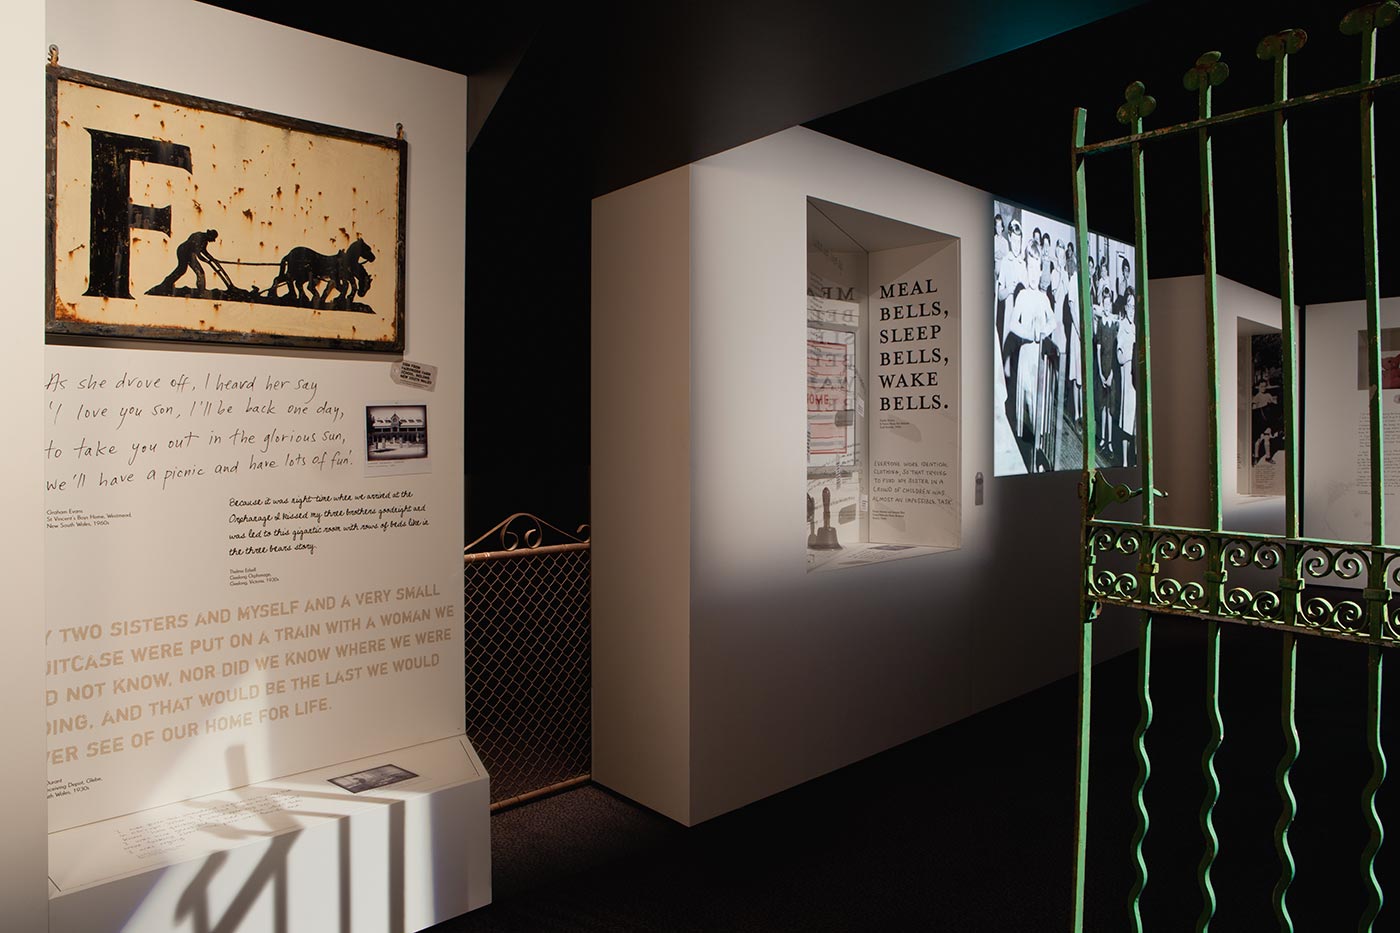 View of the Inside exhibition at the National Museum of Australia. - click to view larger image